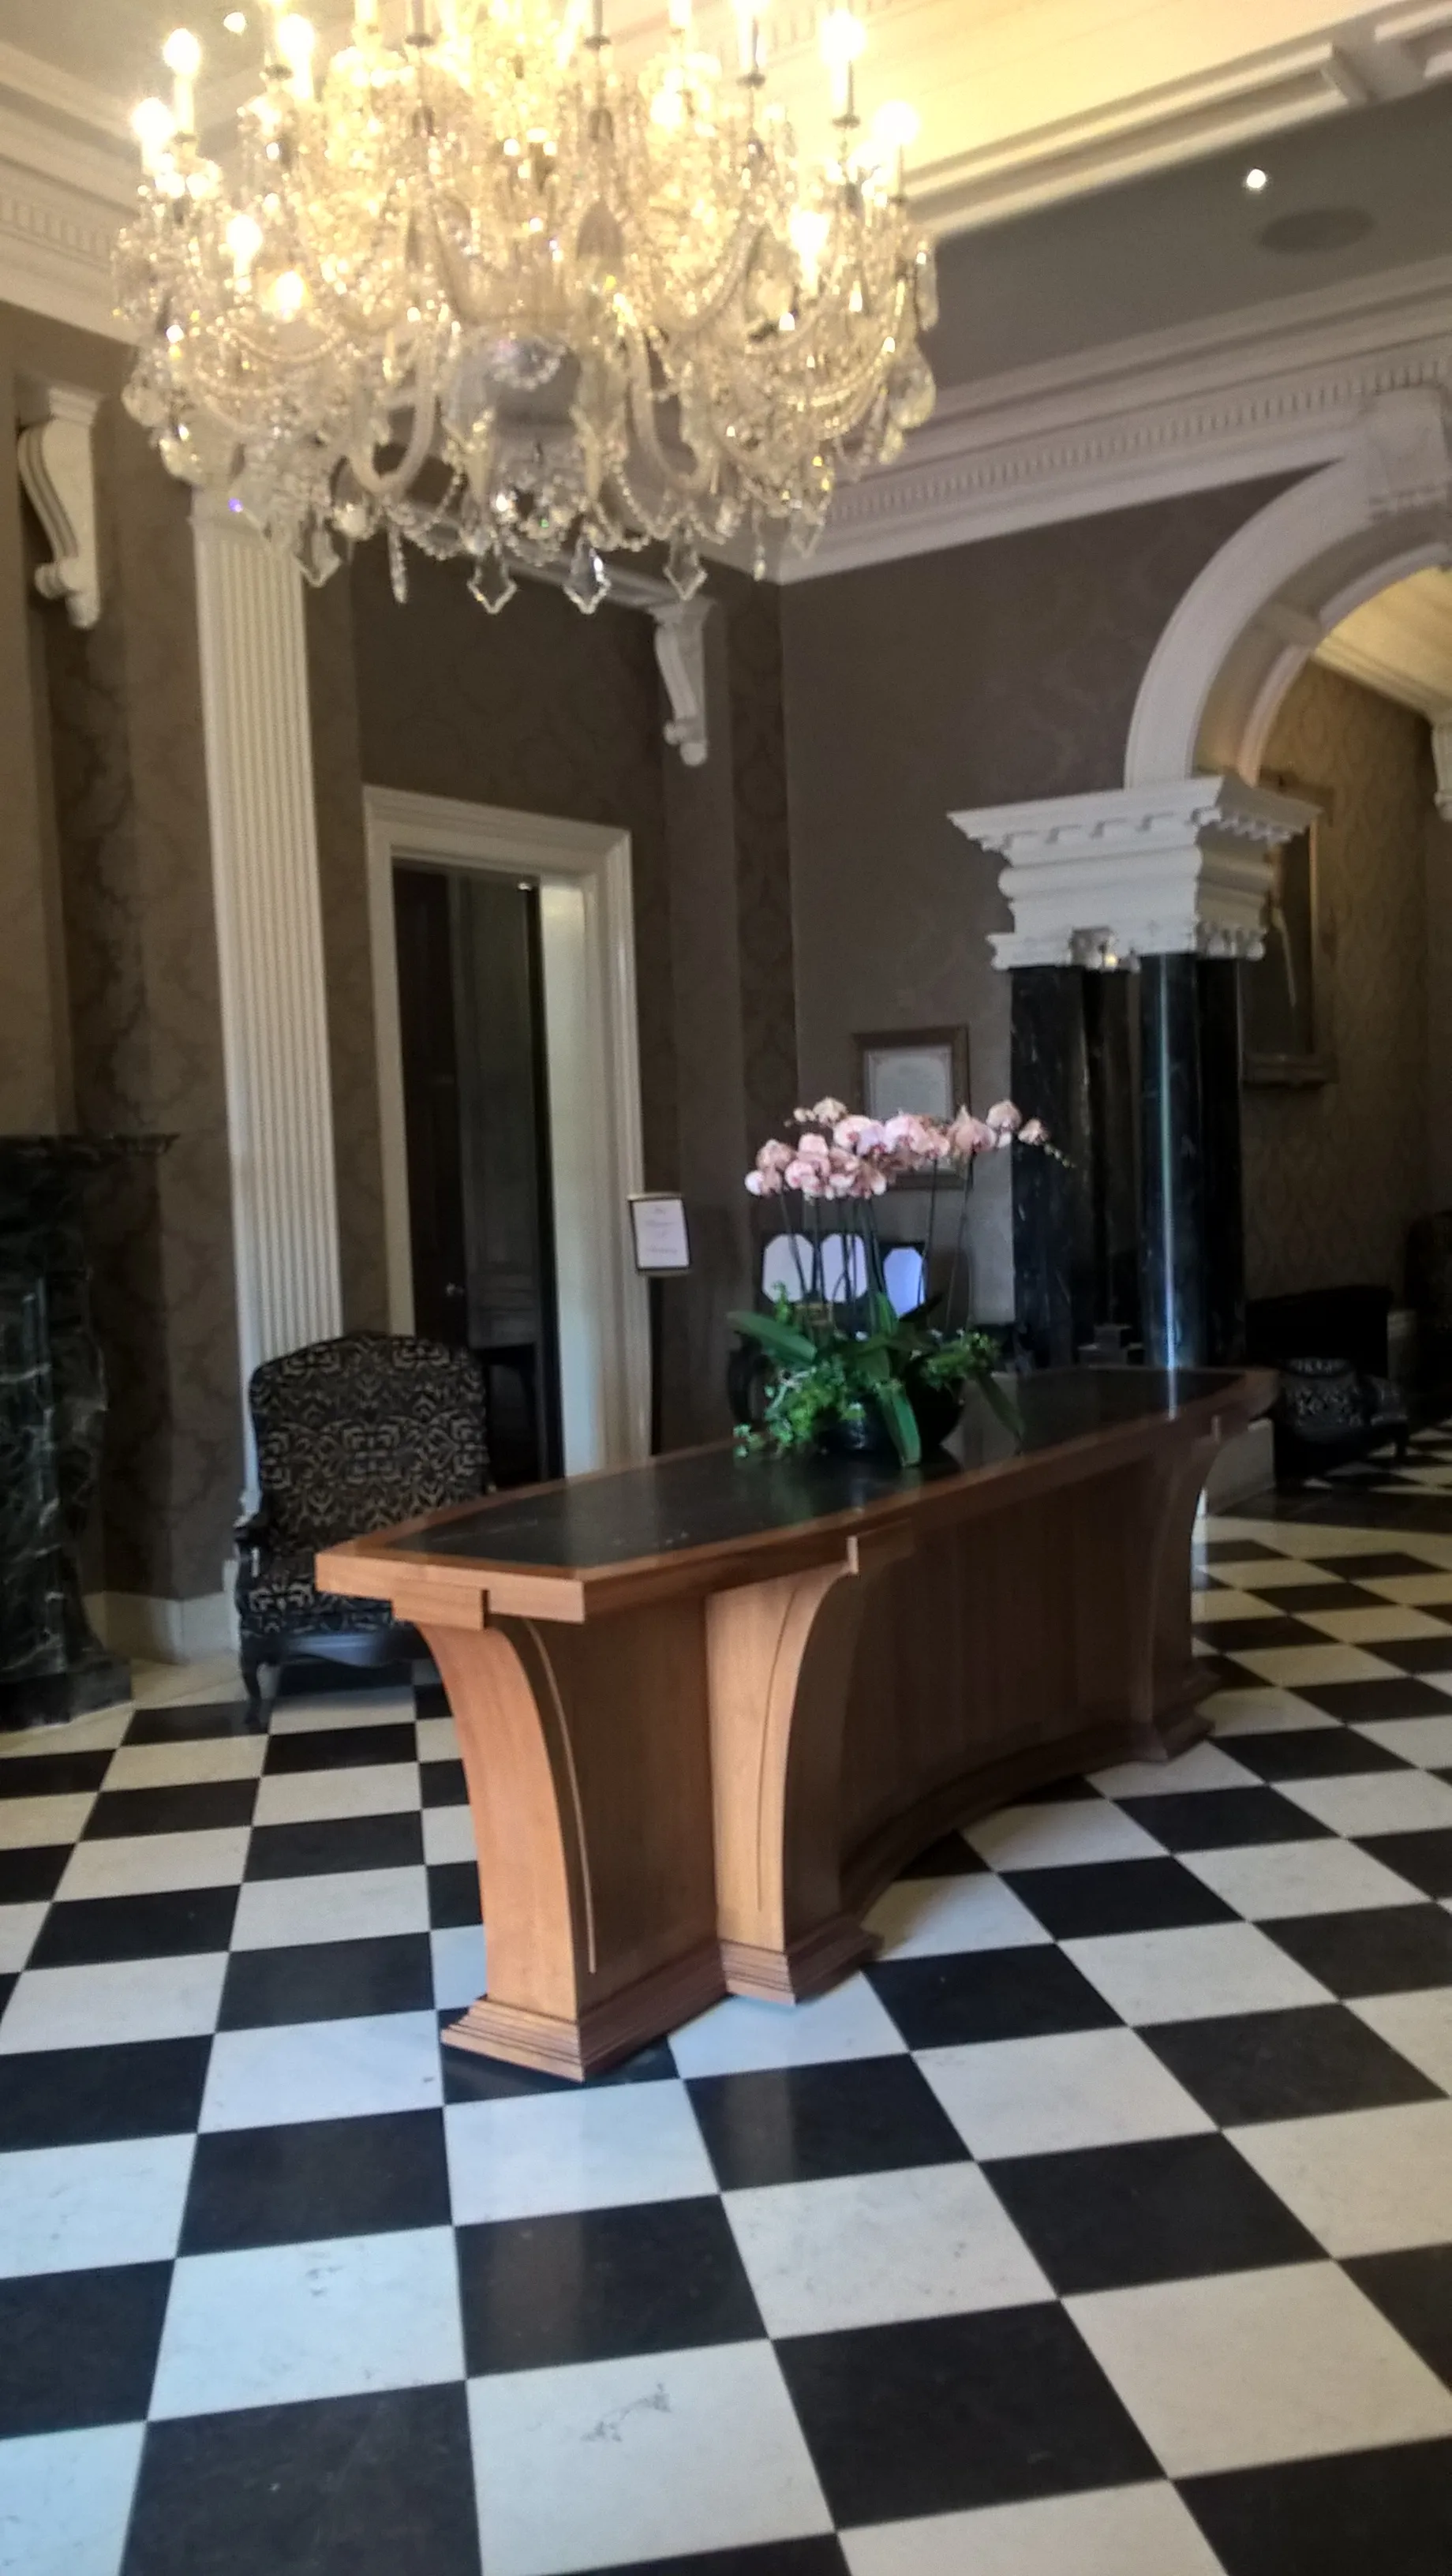 Photo showing: Lobby of Oulton Hall with chandelier and chequerboard floor.